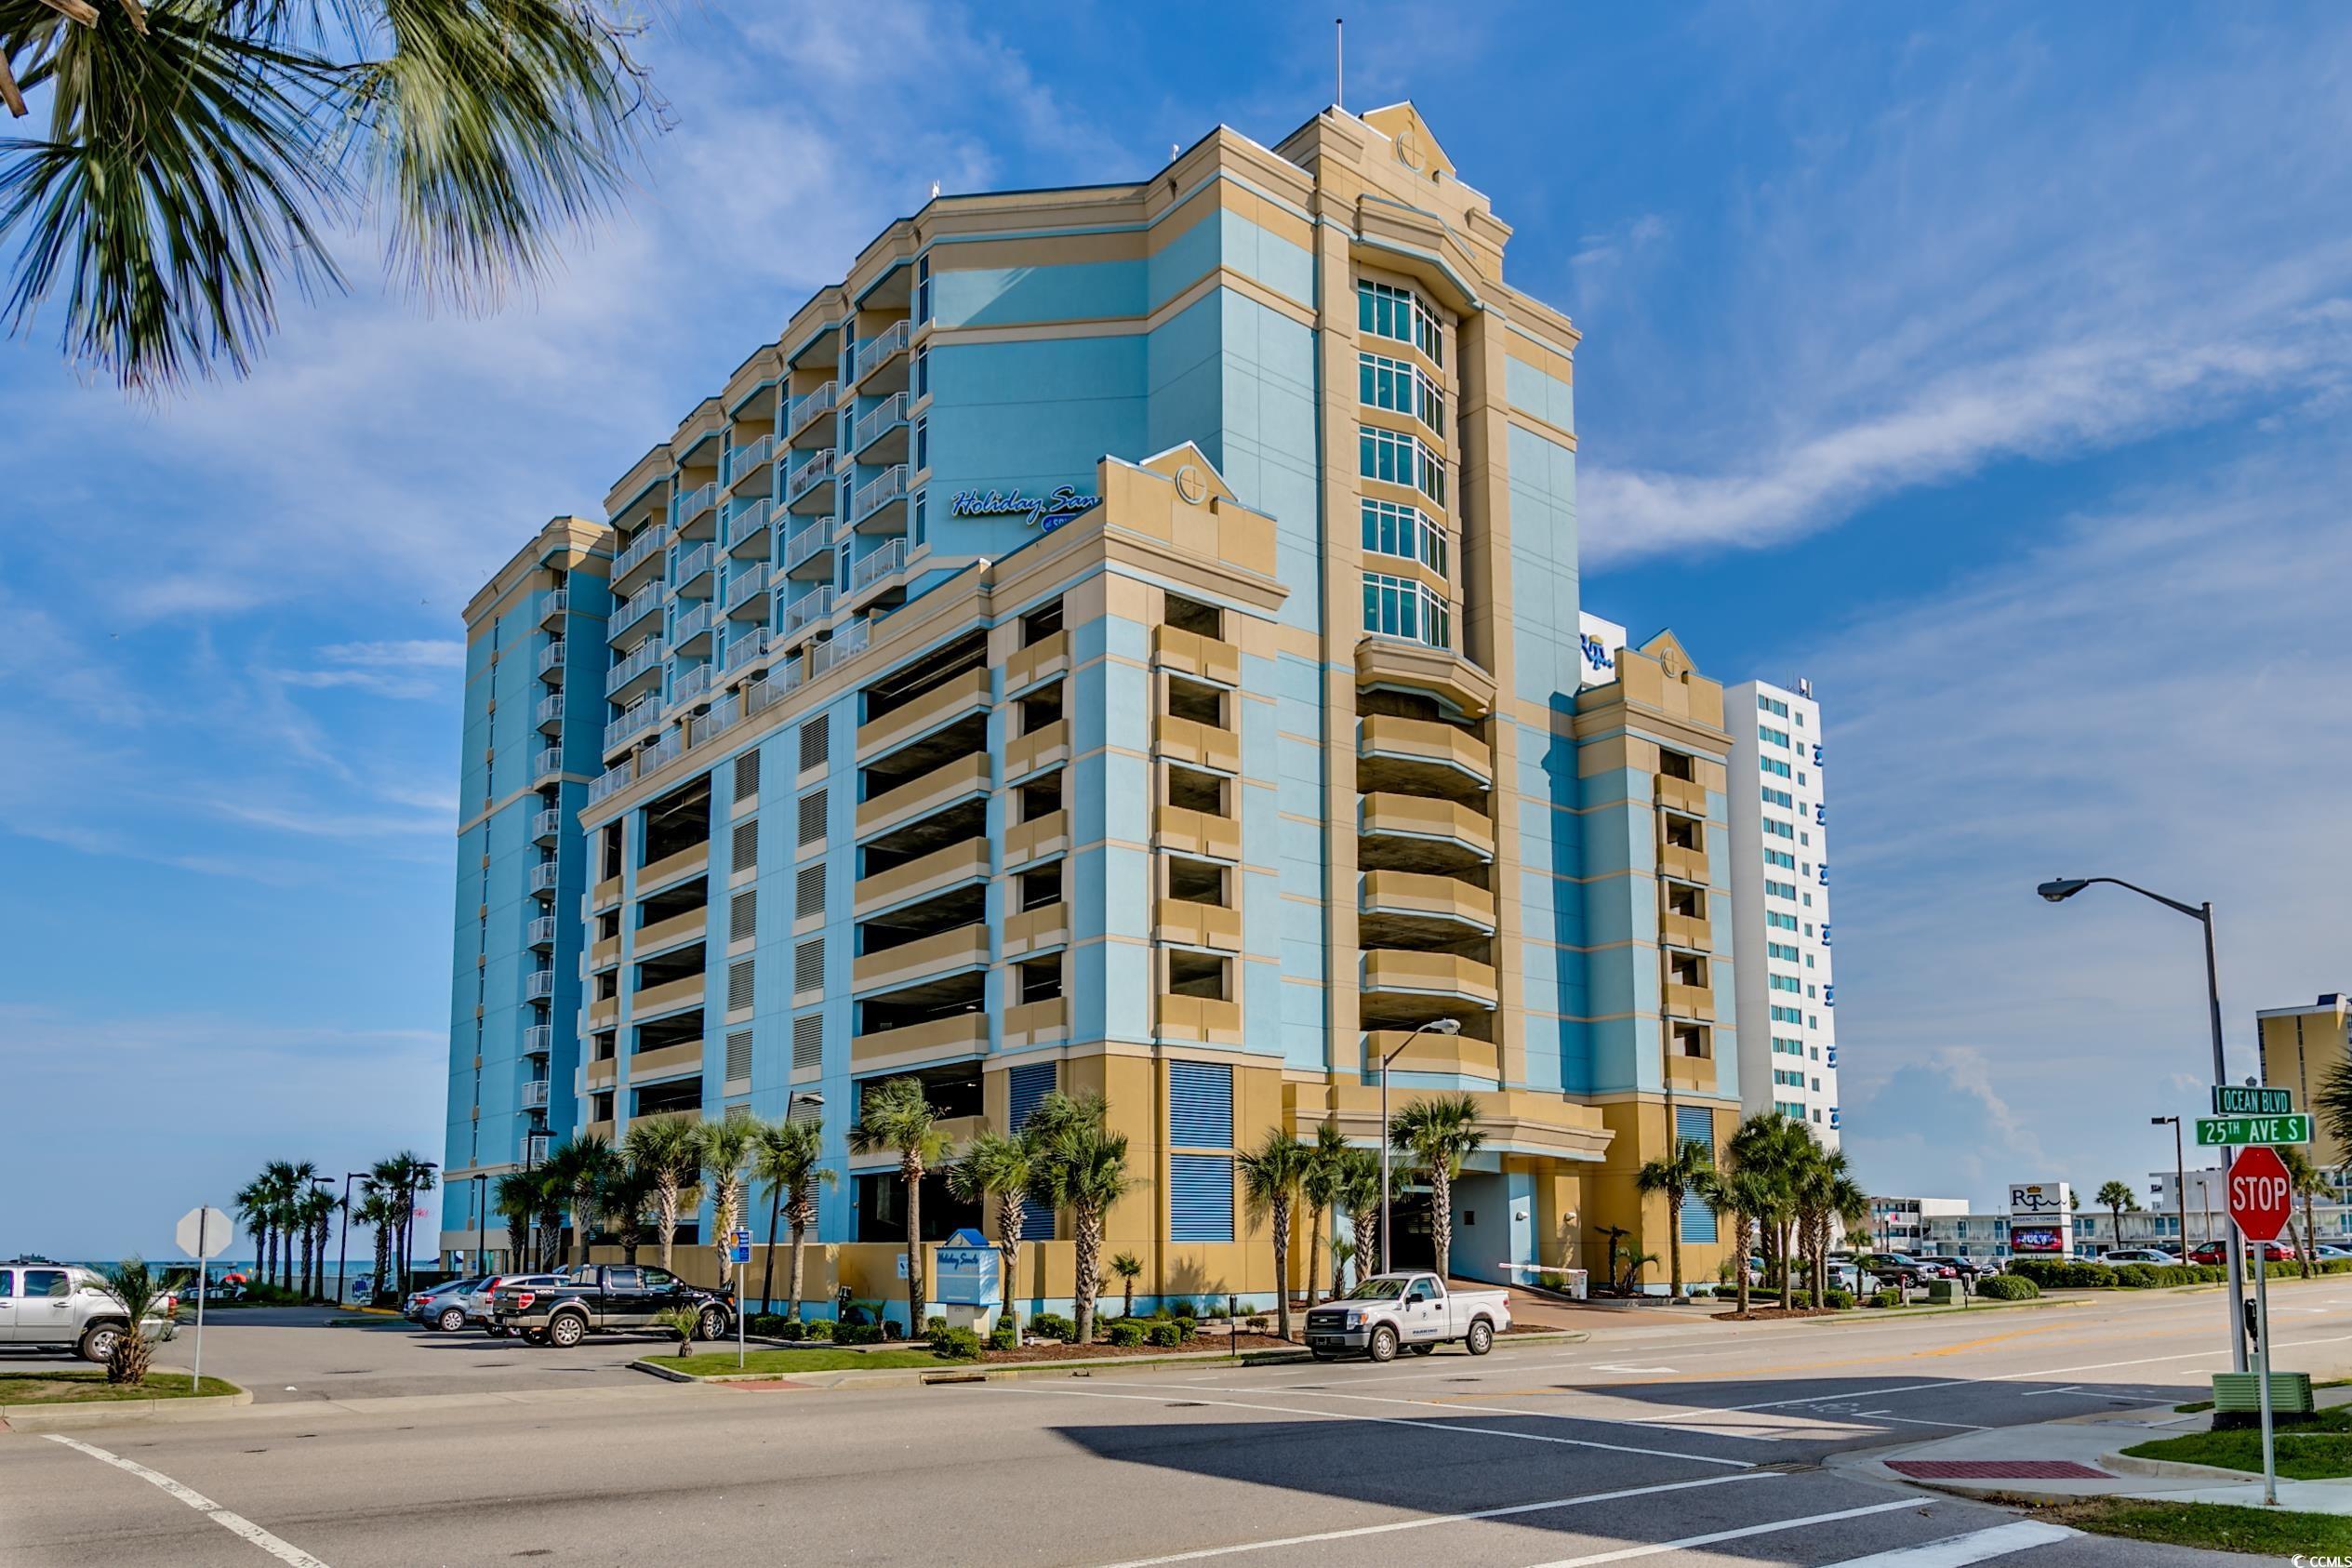 airbnb or vrbo friendly 1 bedroom, 1 bath 11th floor, city/ ocean view condo available at holiday sands in myrtle beach. unit is being sold completely furnished, and features a true 1 bedroom large enough to fit two queen beds. other features include: granite counter tops, stainless finish appliances, a washer and dryer in unit, and one assigned parking space in the gated garage. holiday sands offers oceanfront access, heated indoor pool and lazy river, hot tub, outdoor pool, lounging area, fitness center, and more. owner financing available. make an appointment today.